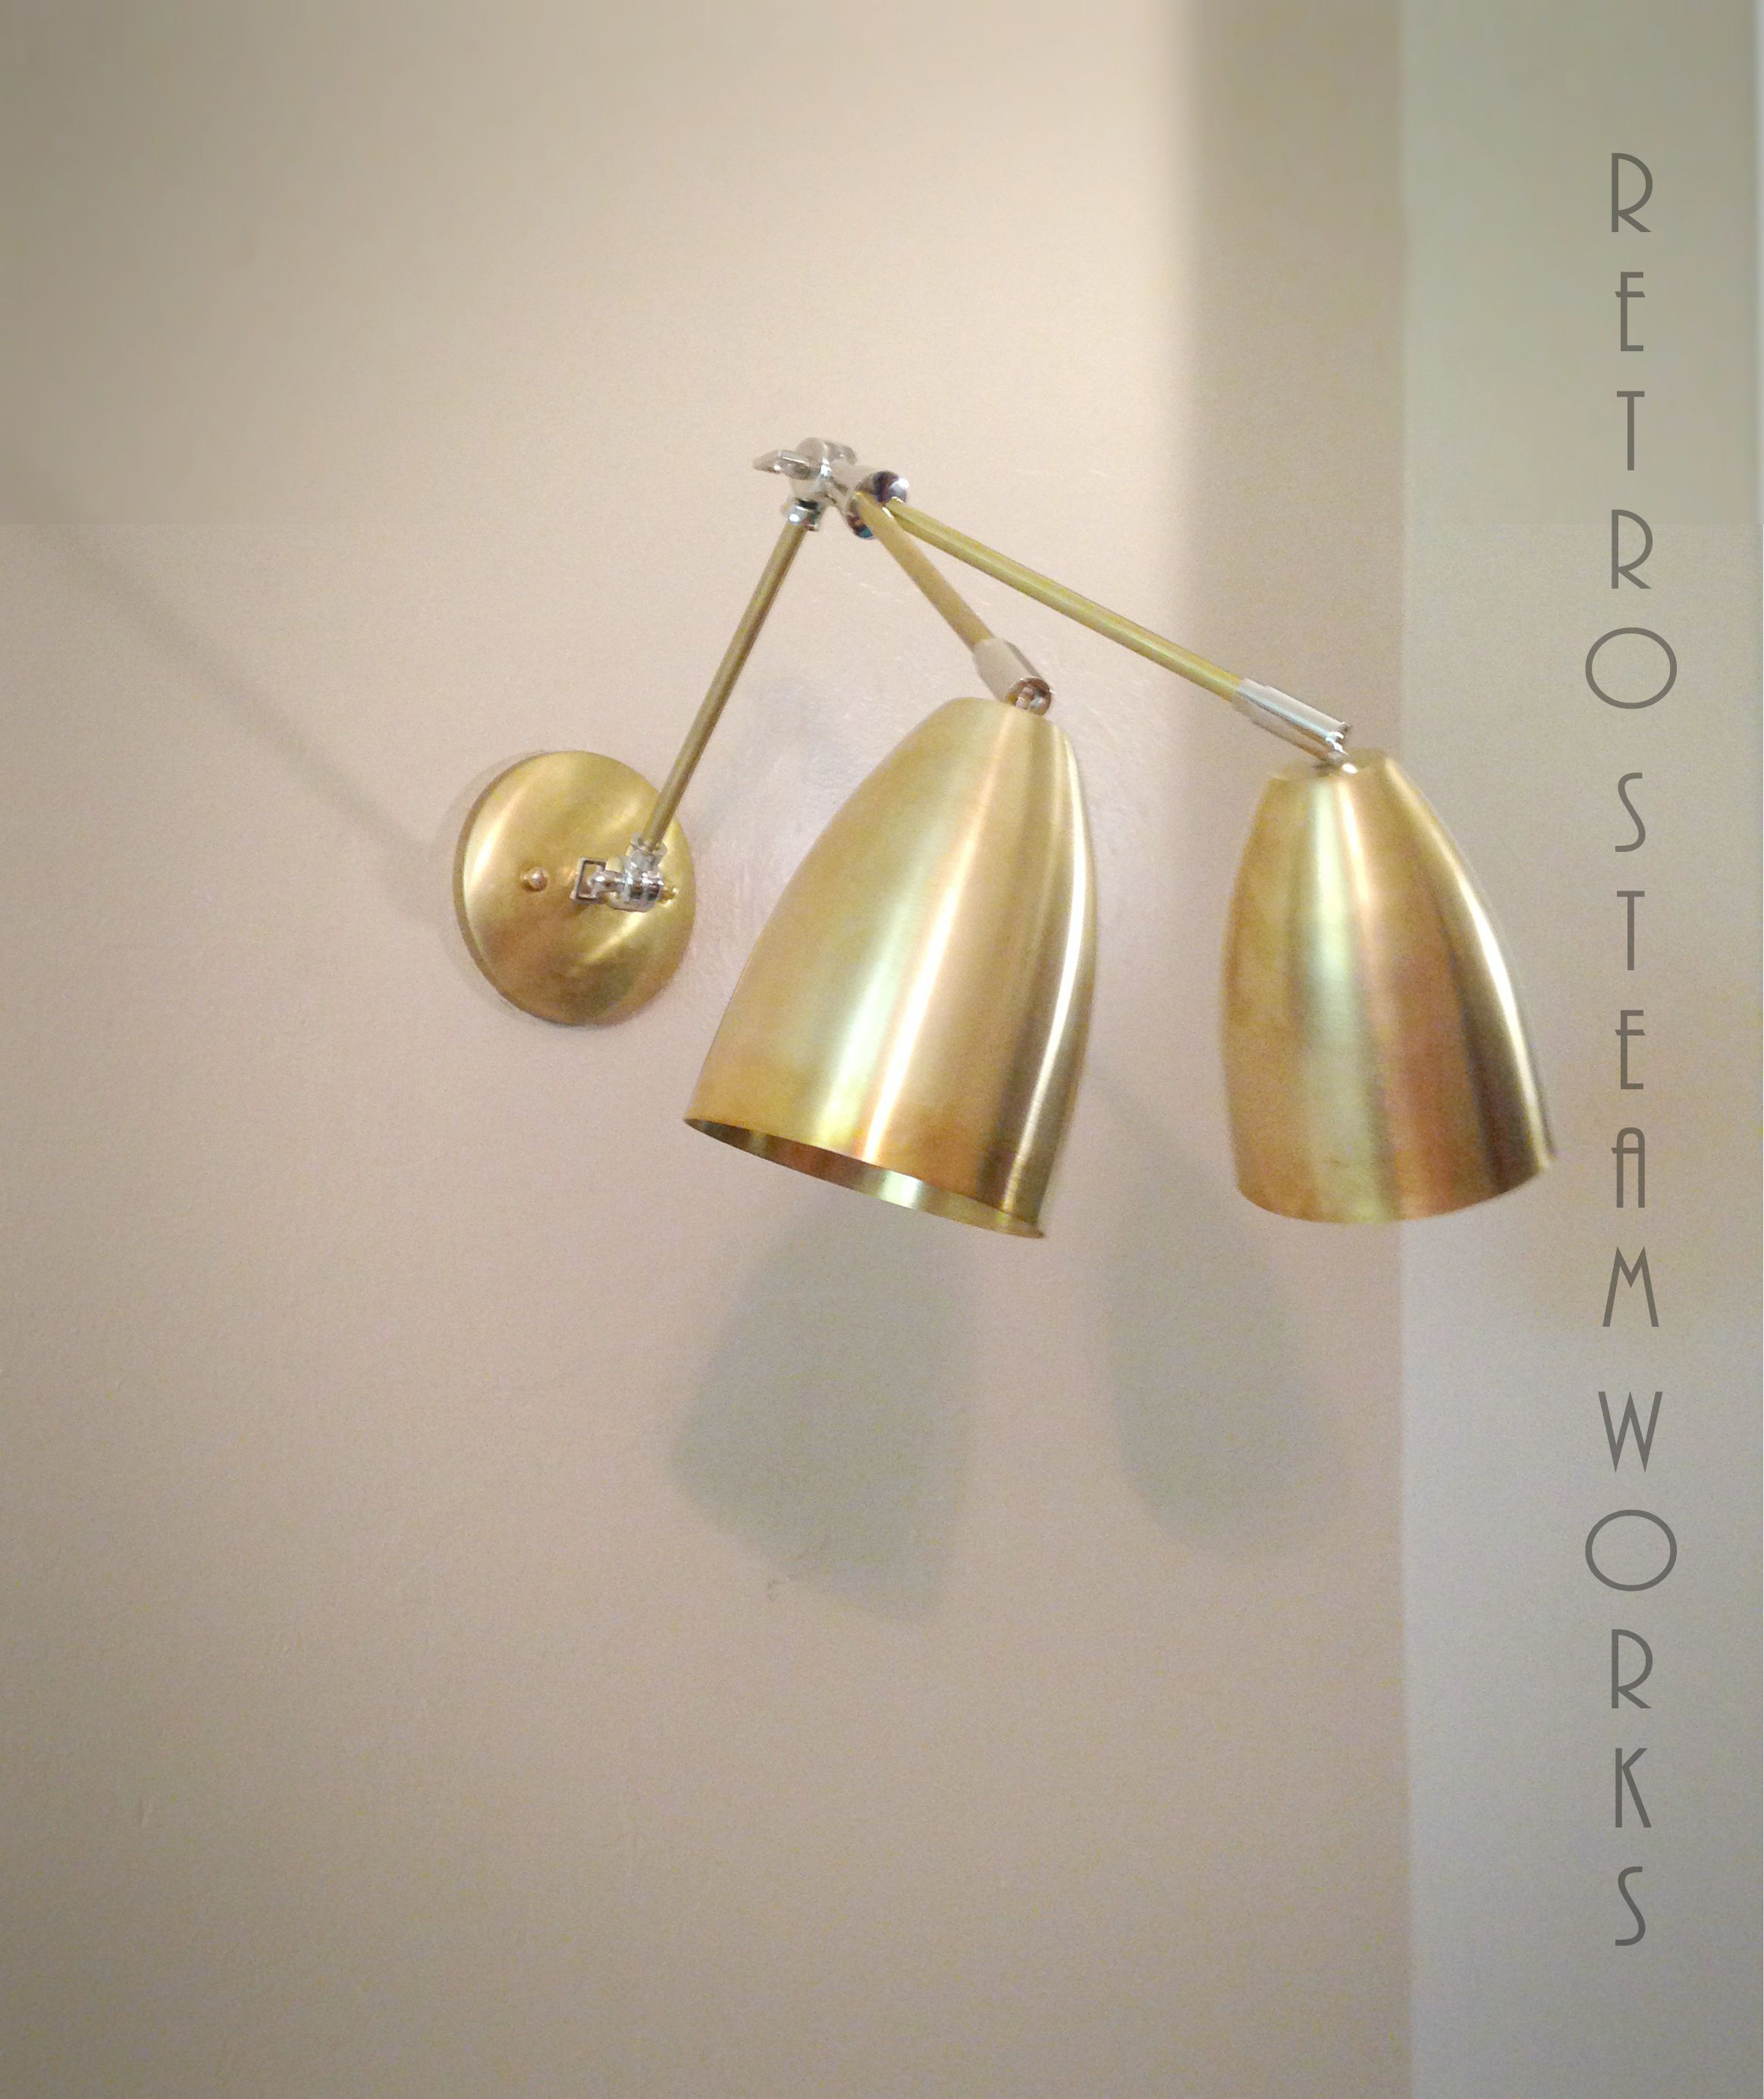 Buy Hand Made Adjustable Articulating Wall Mount Art Light Brass And Nickel  Loft & Gallery Sconce, made to order from Retro Steam Works